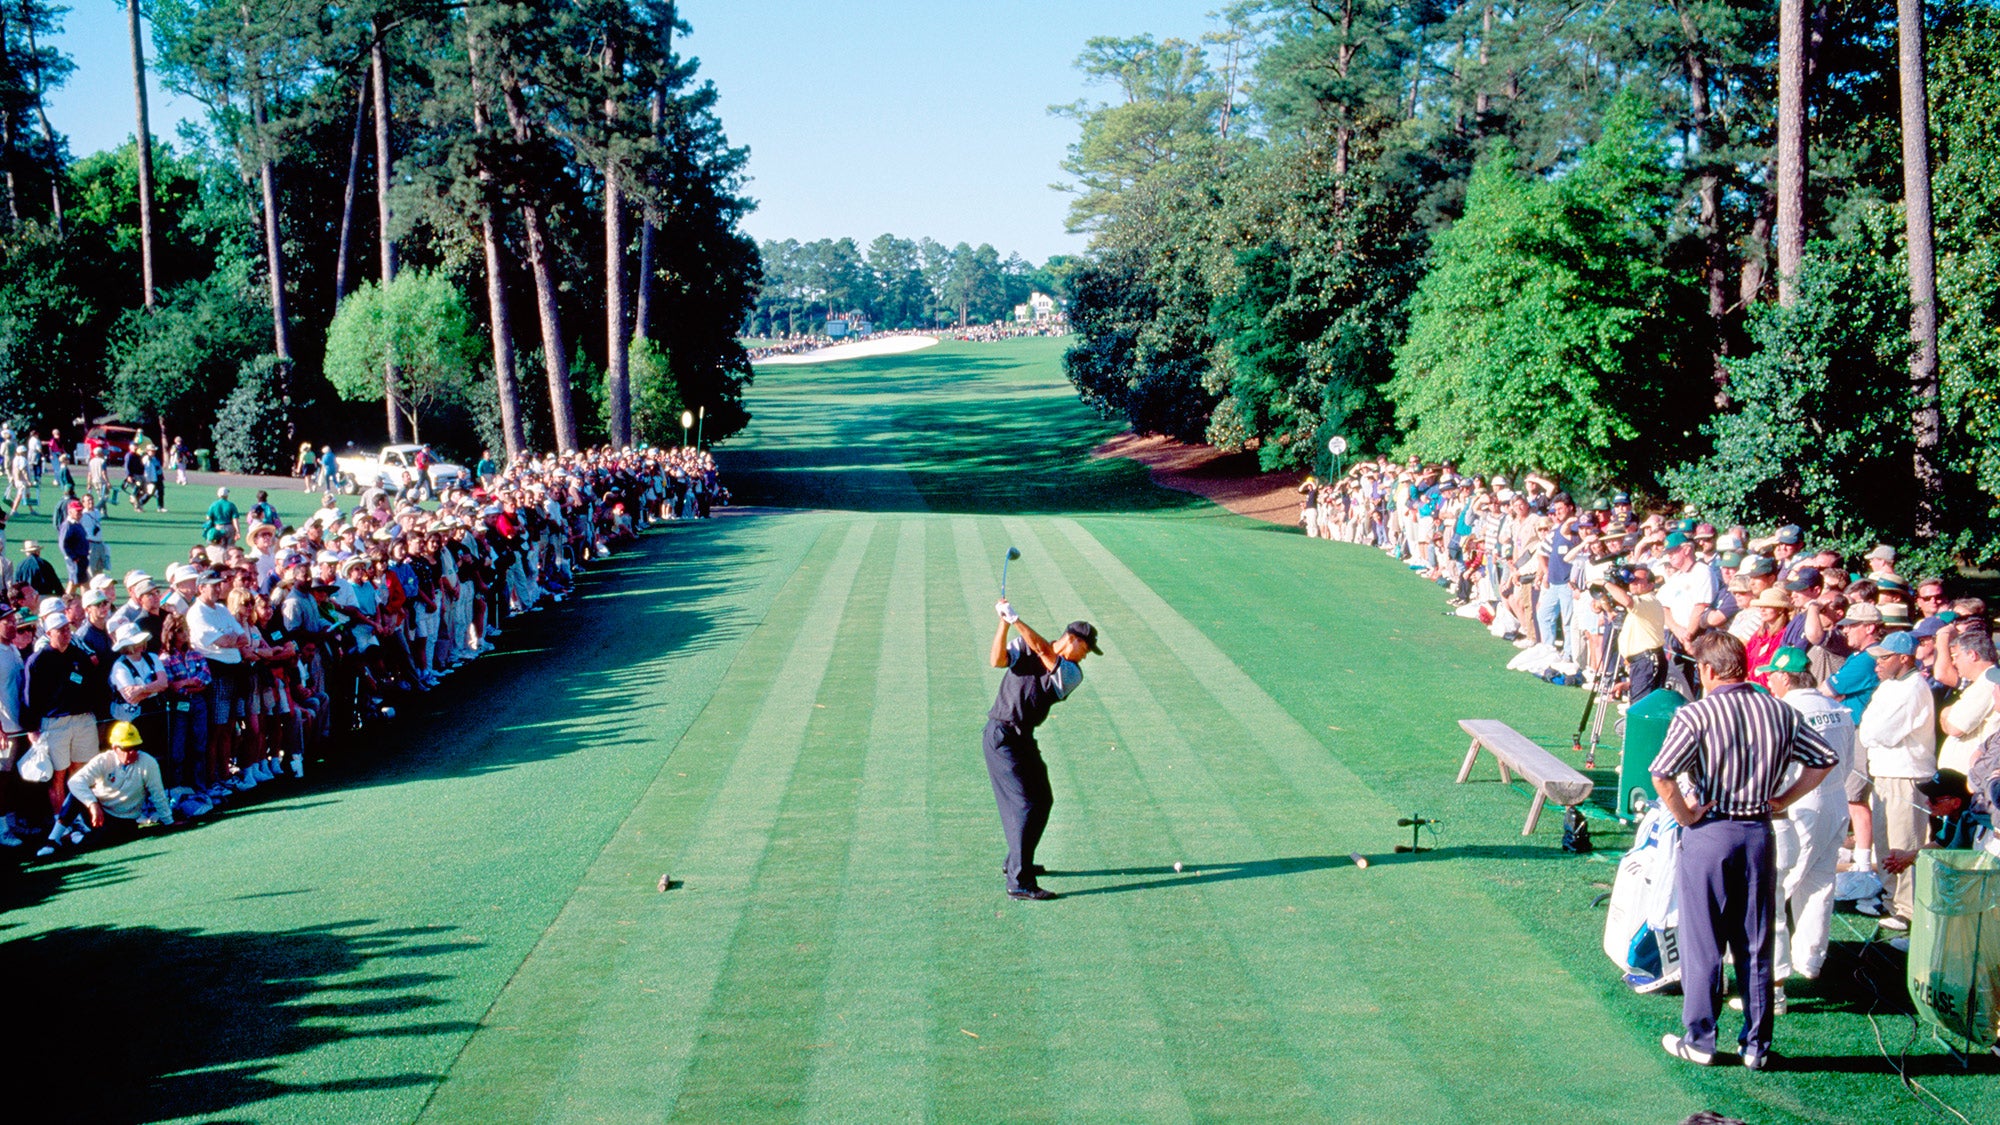 Tiger Woods's first Masters win at Augusta in 1997